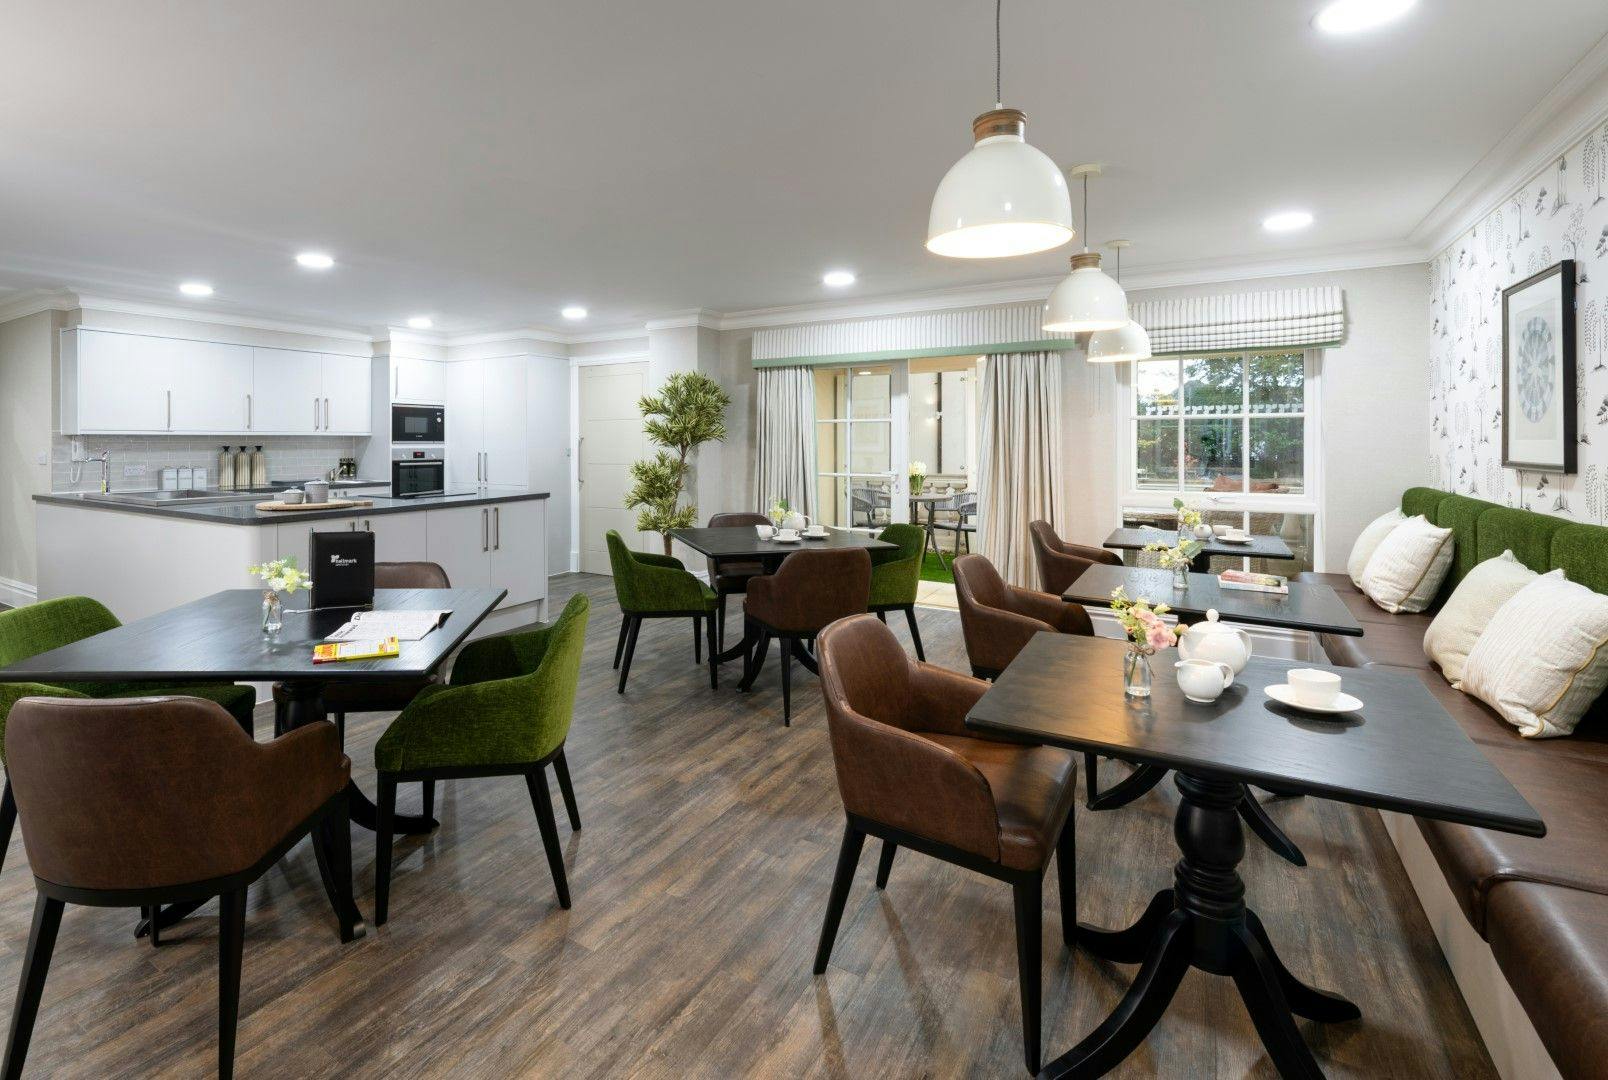 Dining Area at Hutton View Care Home in Brentwood, Essex